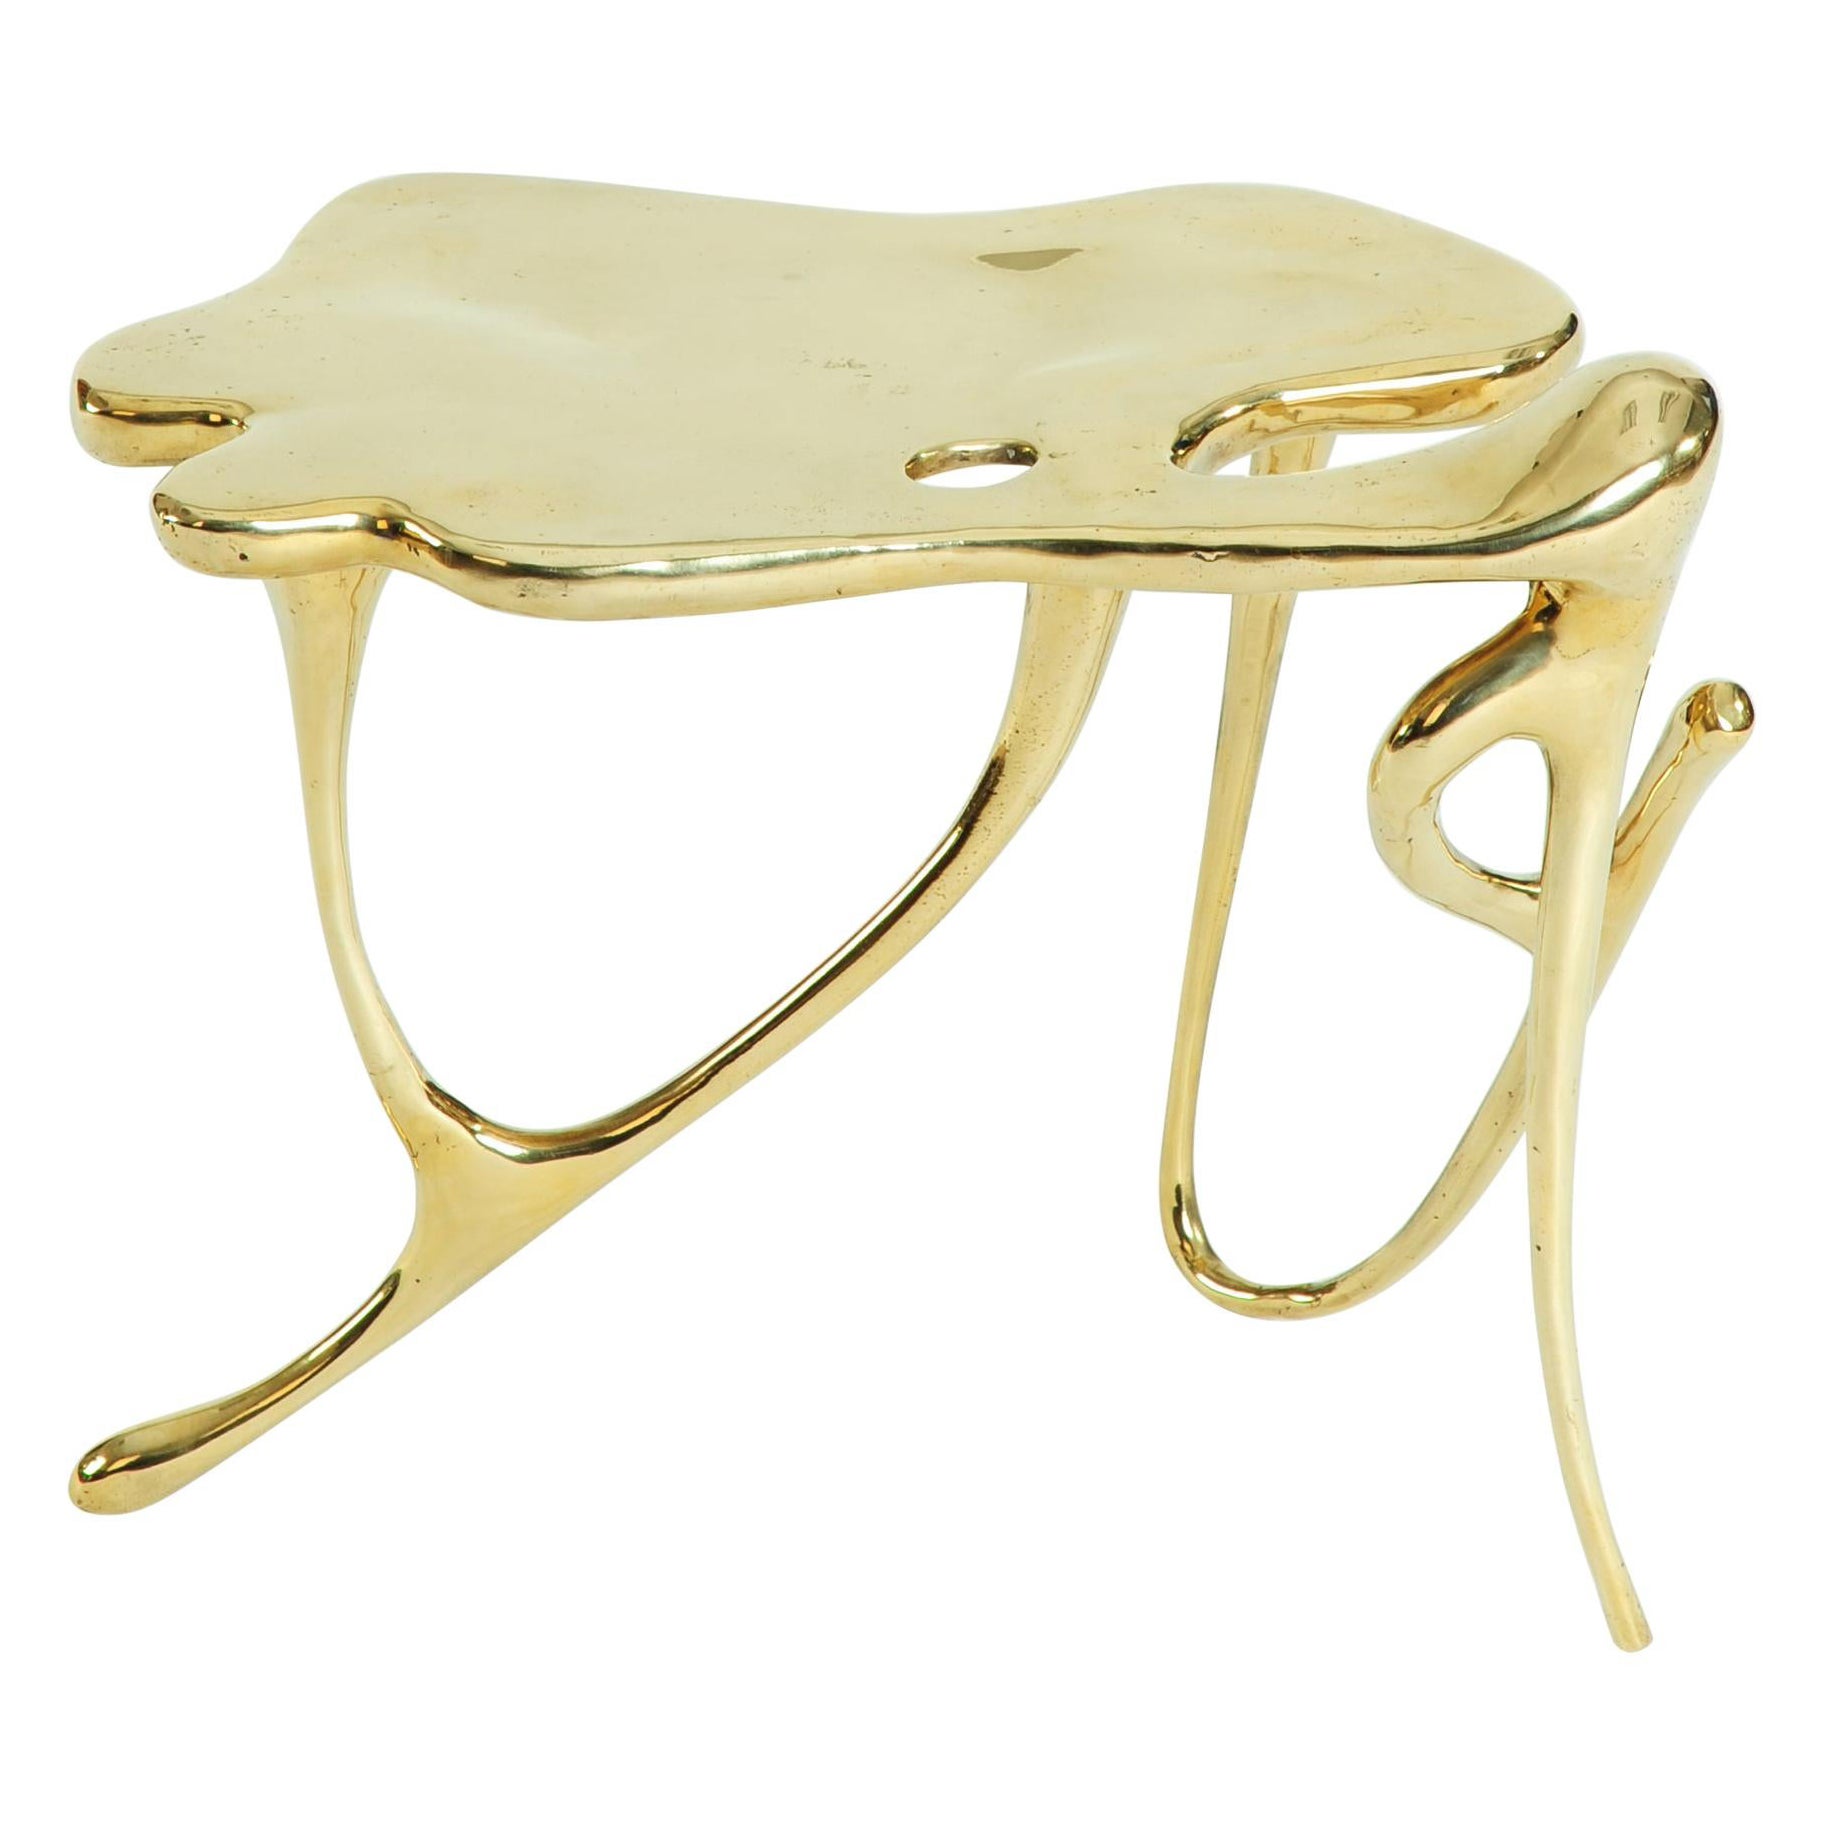 Calligraphic Sculpted Brass Side Table by Misaya